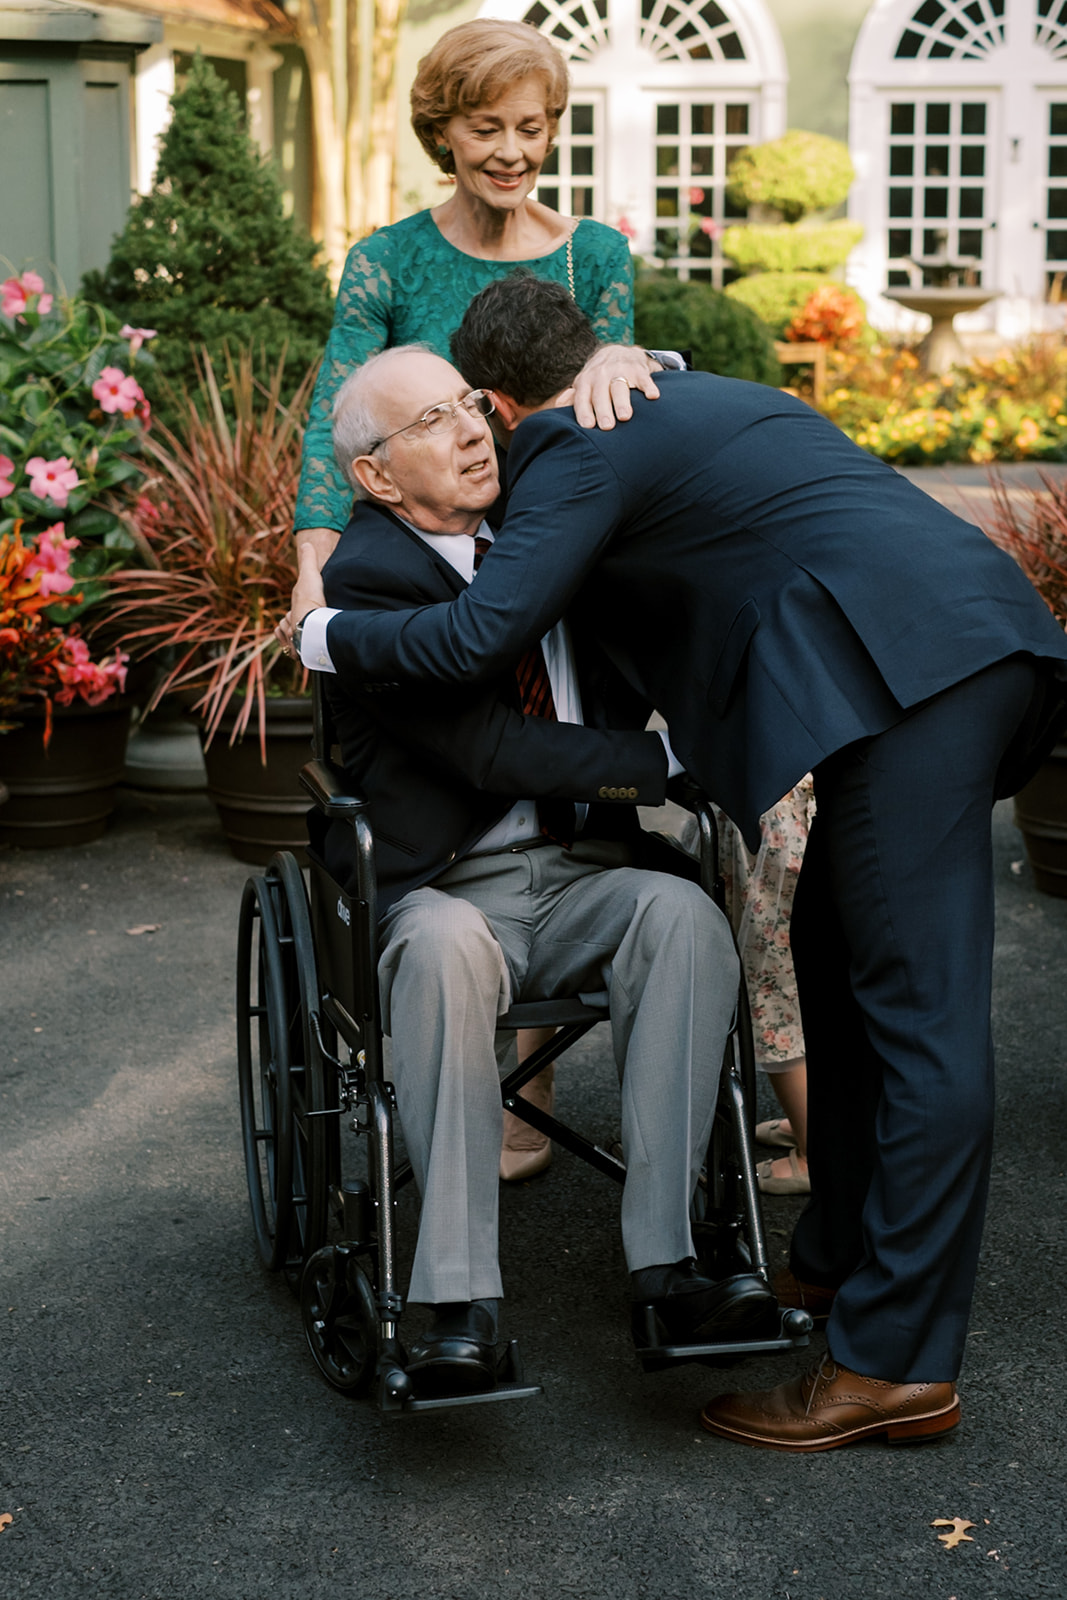 Groom hugging grandfather in a wheelchair before the wedding ceremony